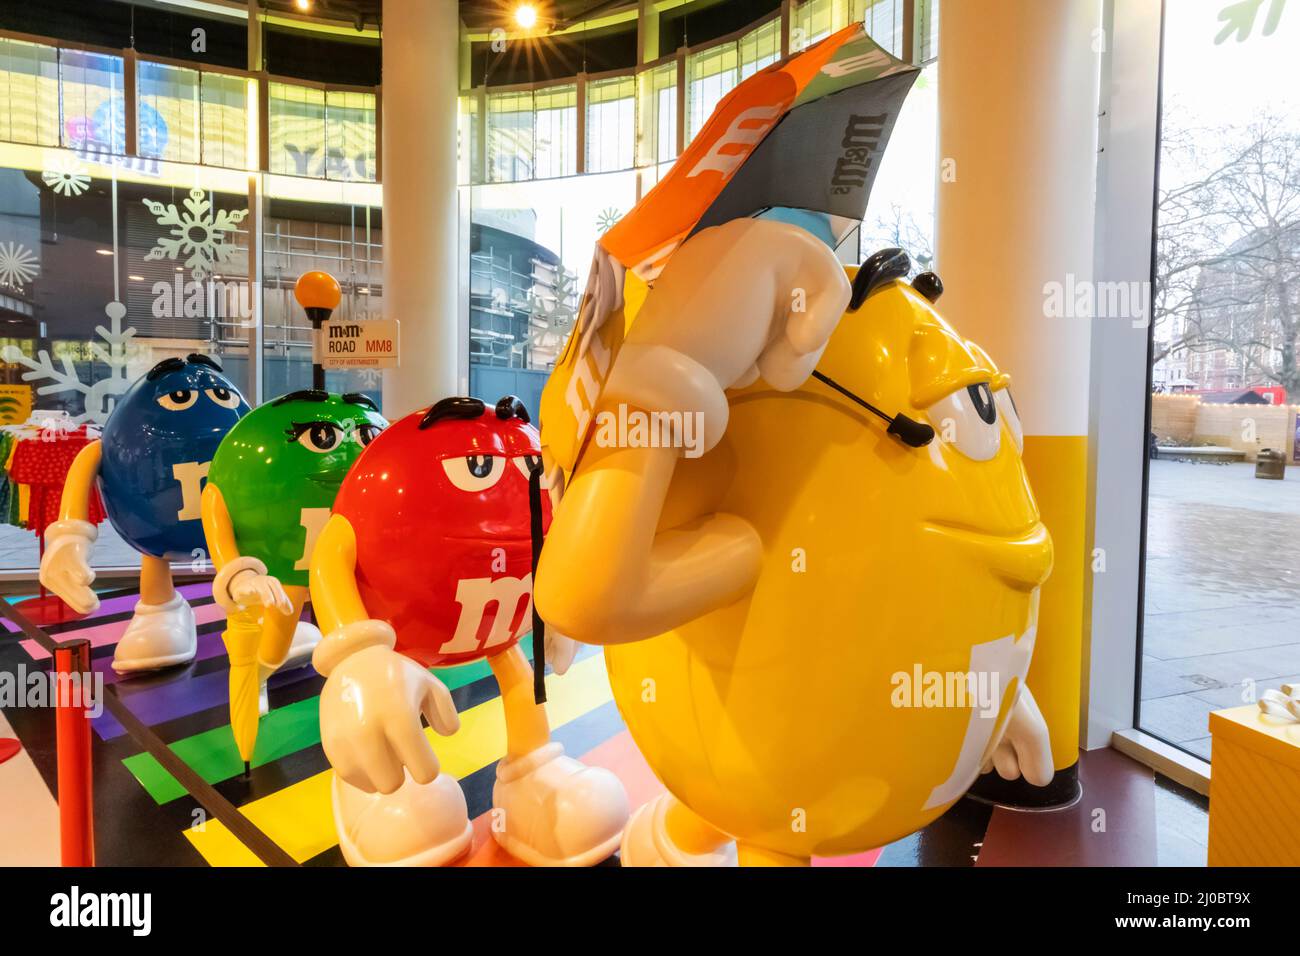 England, London, Leicester Square, M&M's World Store, Window Display of Giant  M&M Figures Stock Photo - Alamy